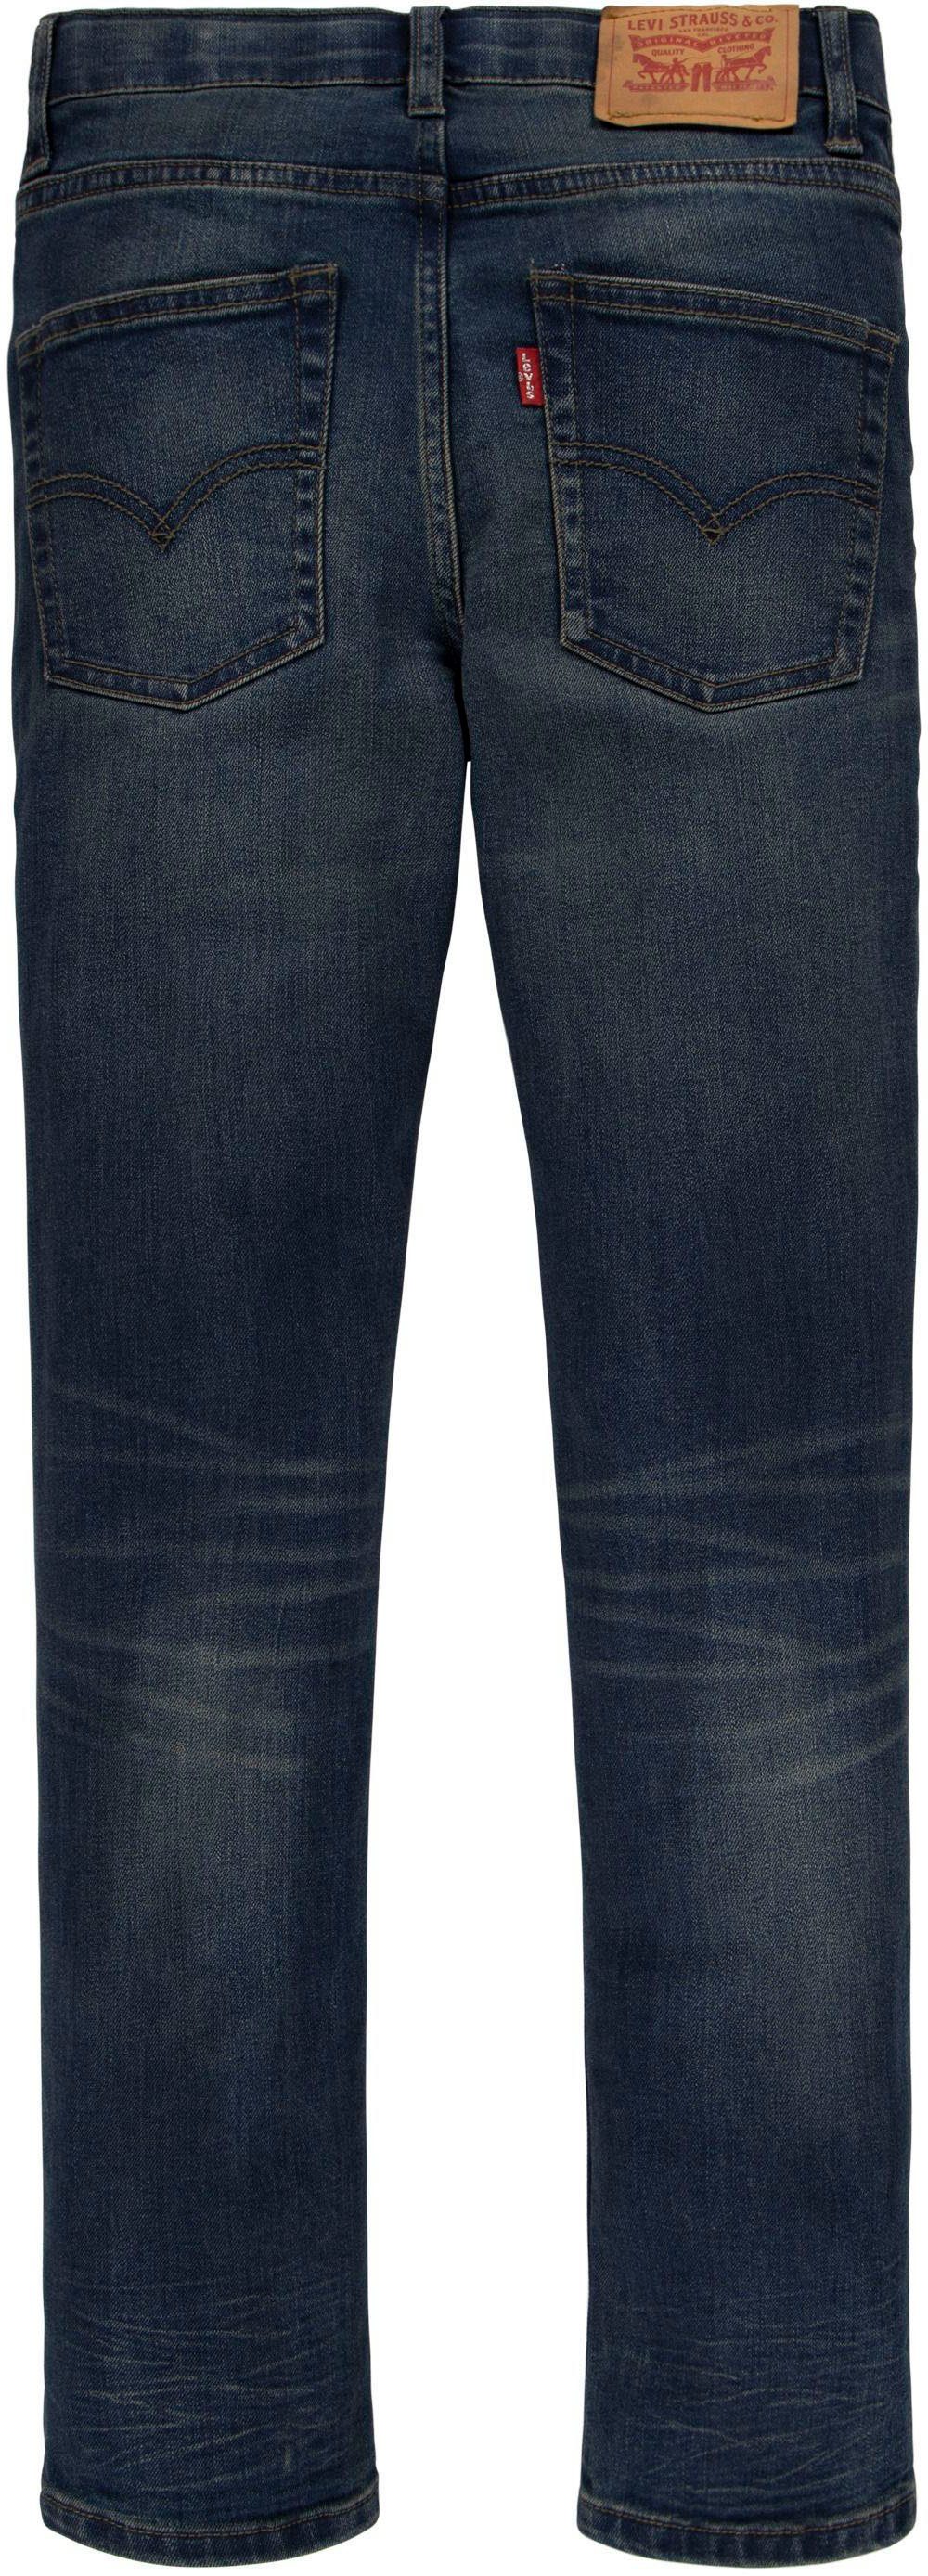 Skinny-fit-Jeans mixed FIT BOYS 510 tape JEANS Kids SKINNY Levi's® for